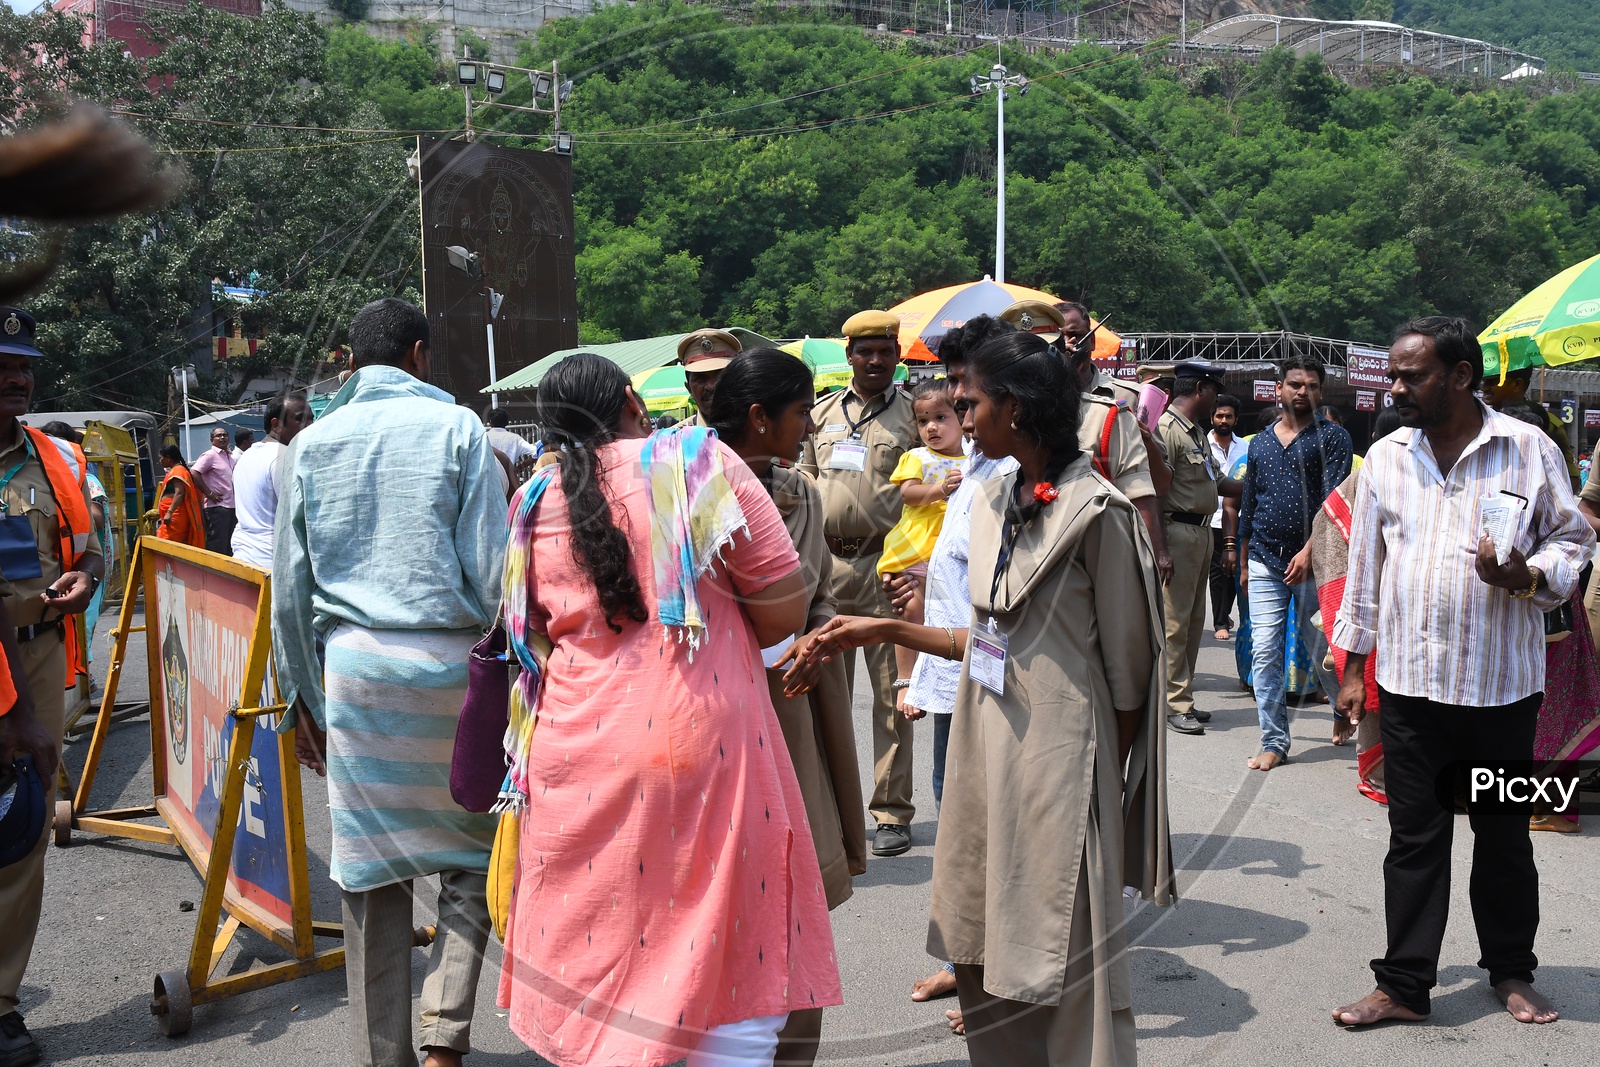 Police Personnel For Security or Vigilance At Darshan Queue Lines During Durga Navratri Festivals